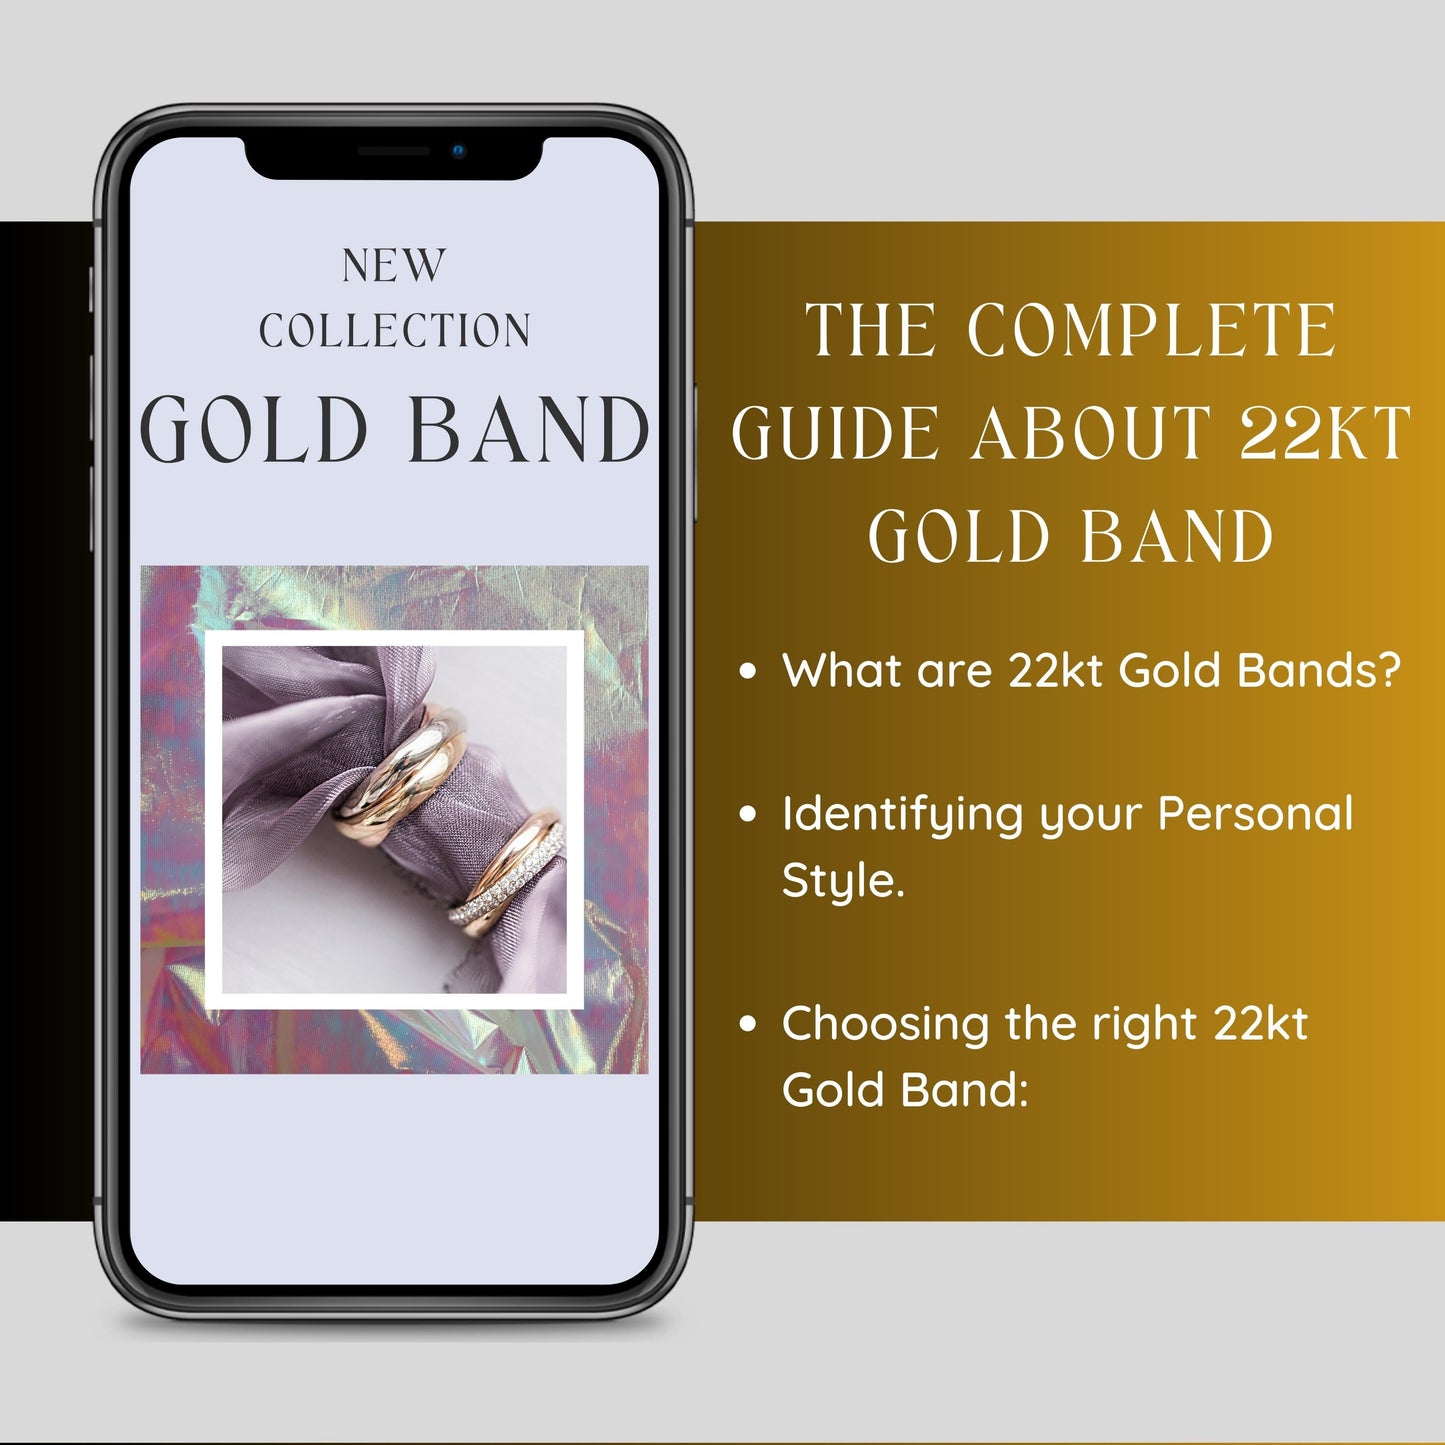 THE COMPLETE GUIDE ABOUT 22KT GOLD BAND